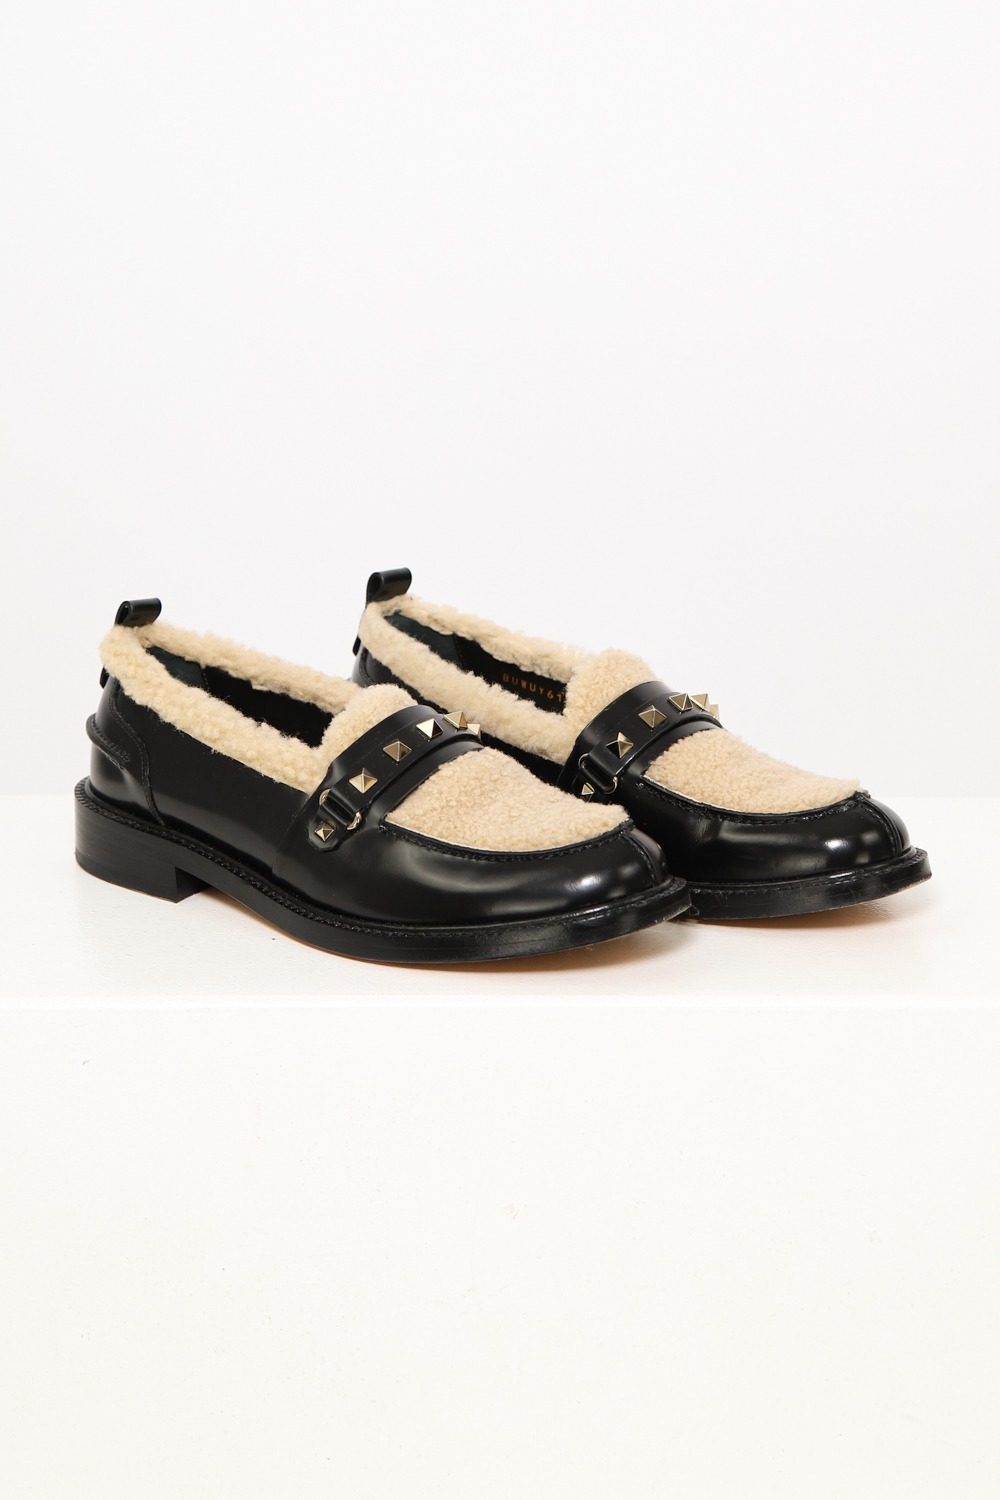 Thumbnail of http://Valentino%20Loafer%20in%20Schwarz%20mit%20Lammfell